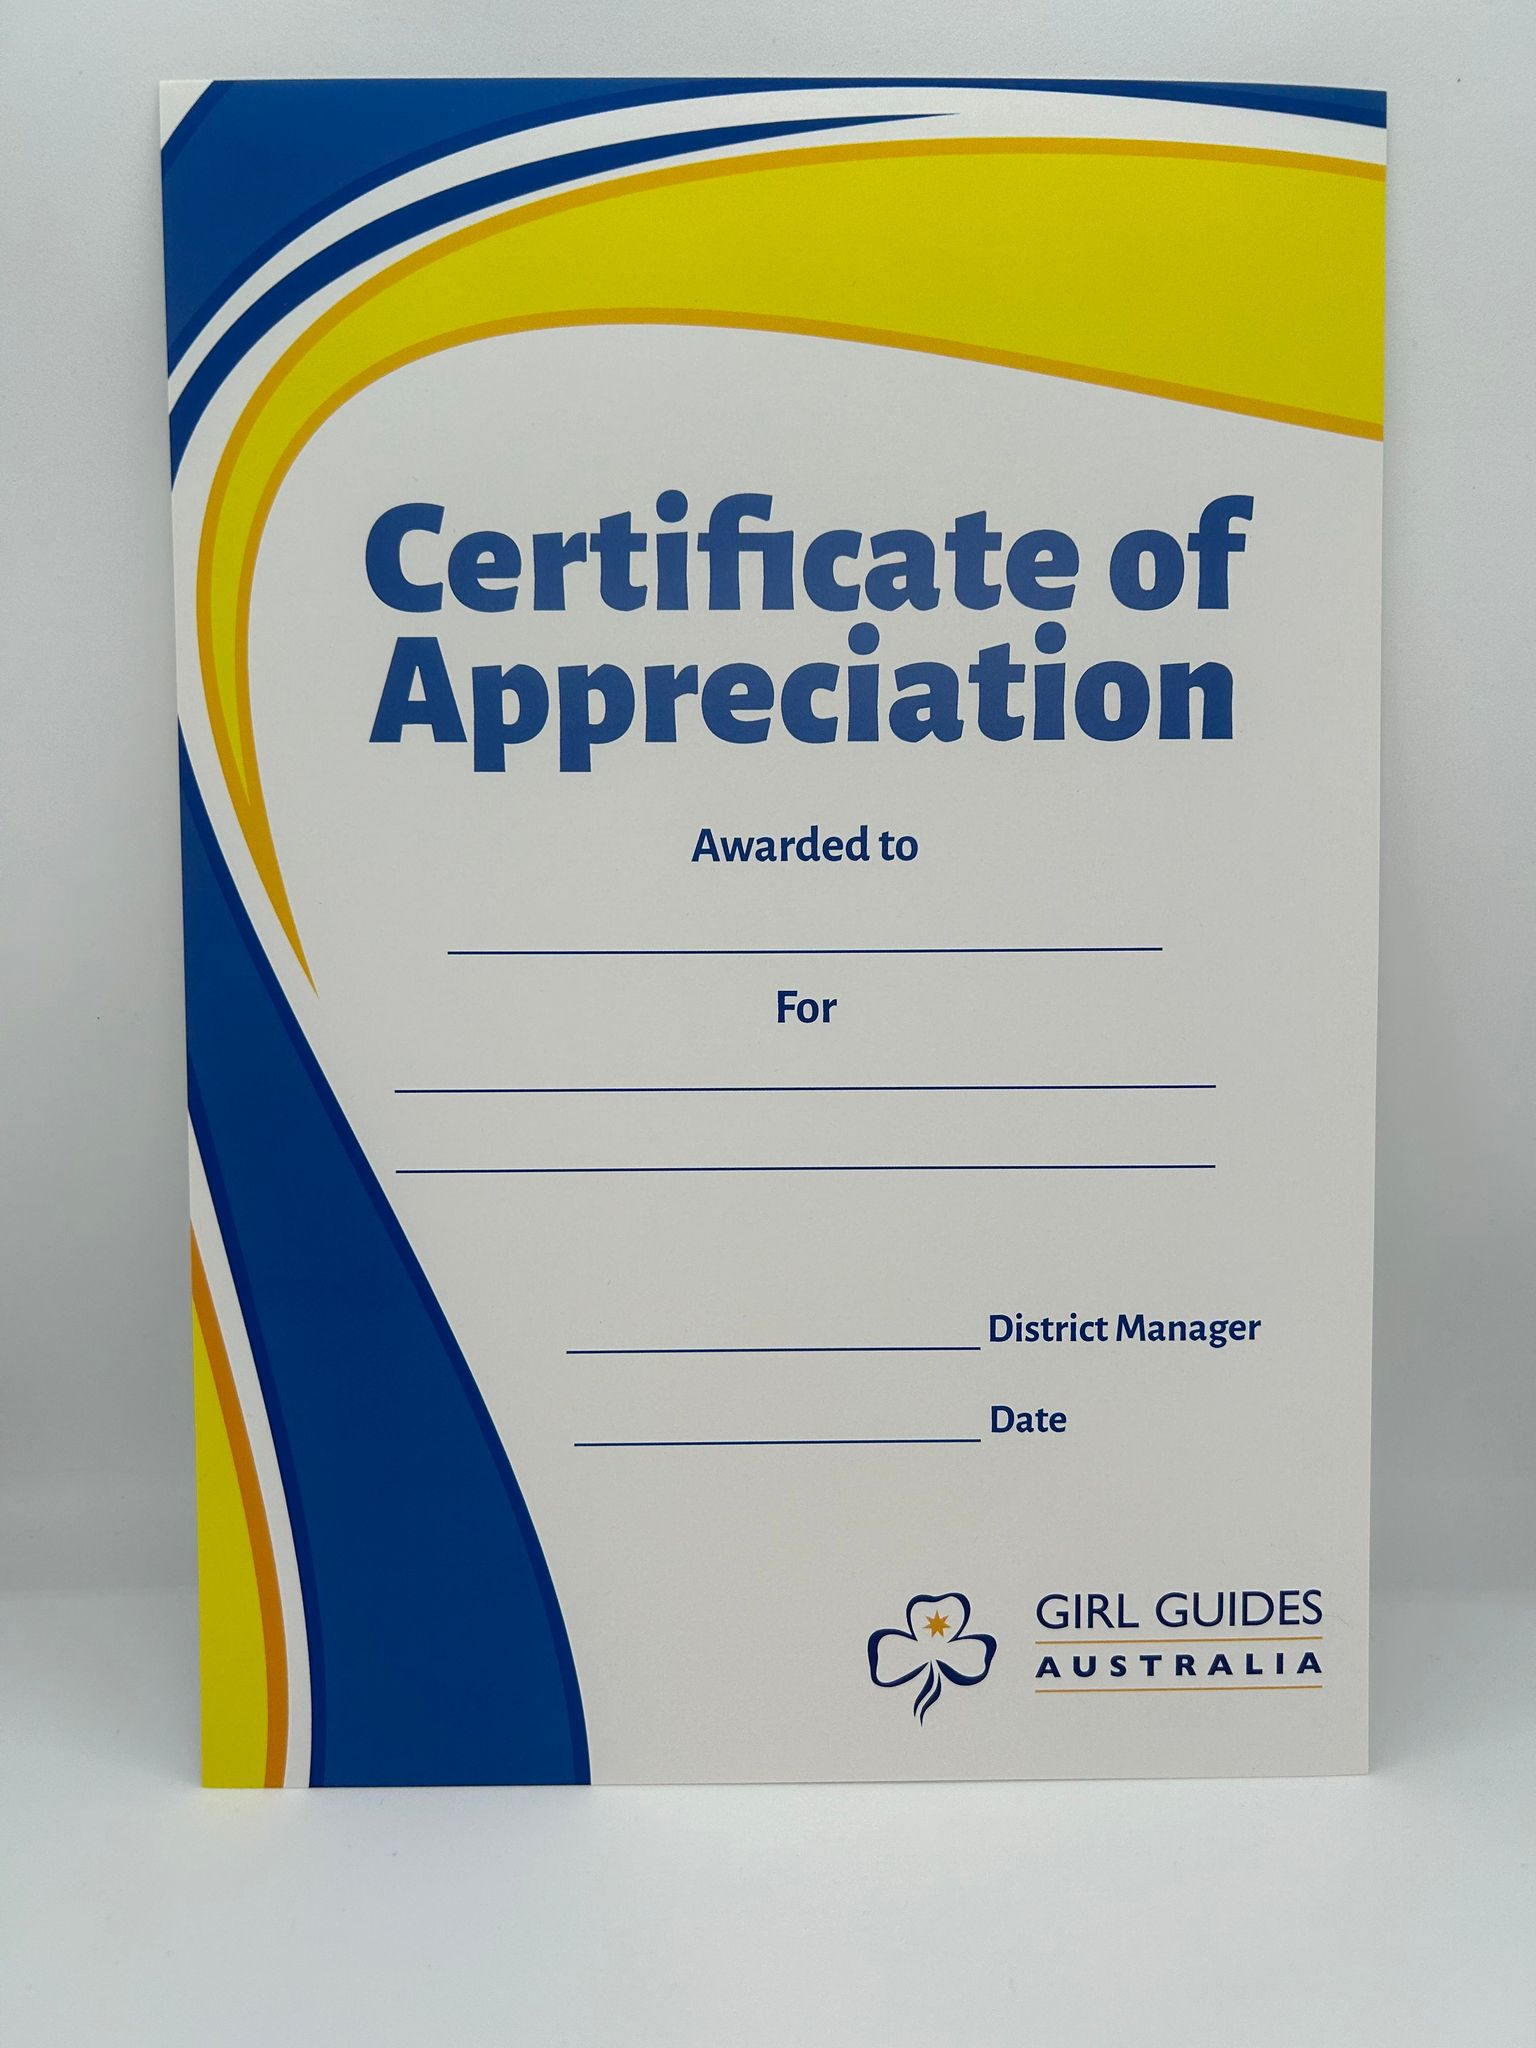 an A4 certificate that says certificate of appreciation with yellow and blue swirls on it